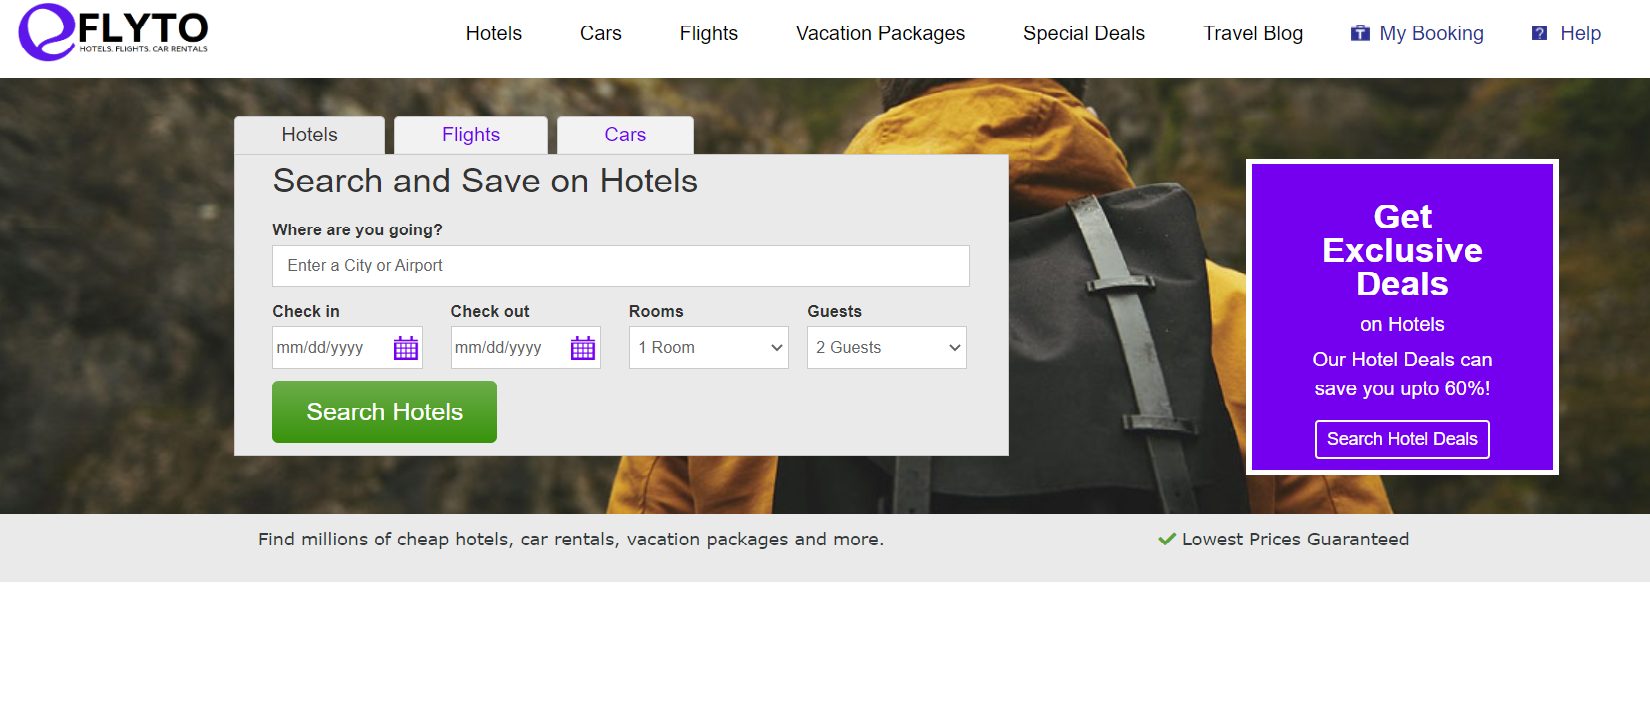 eFLYTO ANNOUNCES LAUNCH OF NEW HOTEL BOOKING WEBSITE